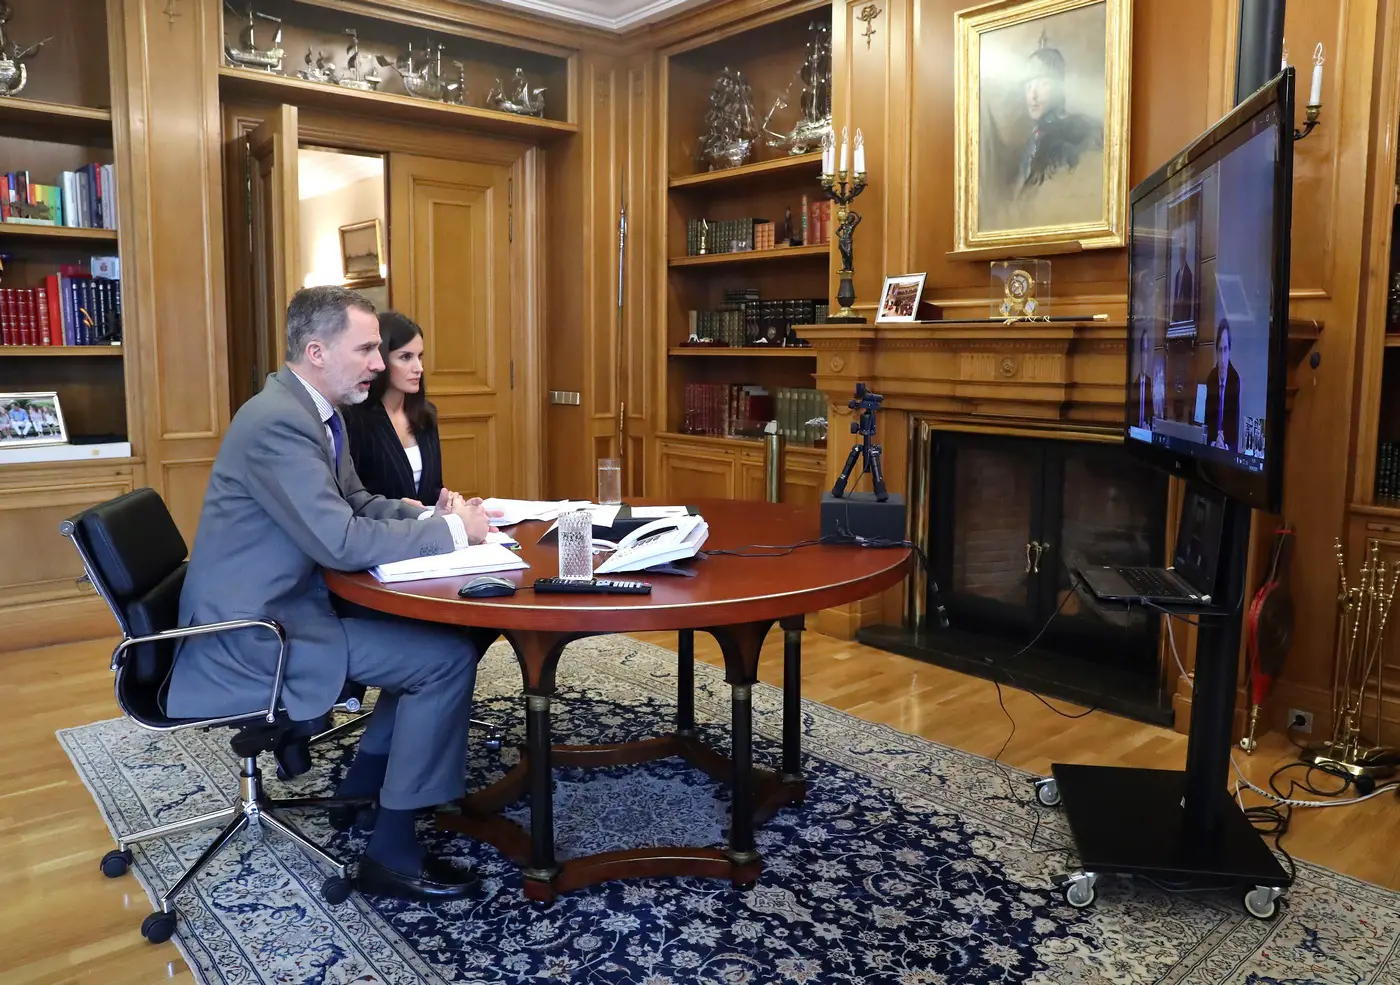 Queen Letizia and King Felipe held a video conference with Spanish Federation of Food and Beverage Industries